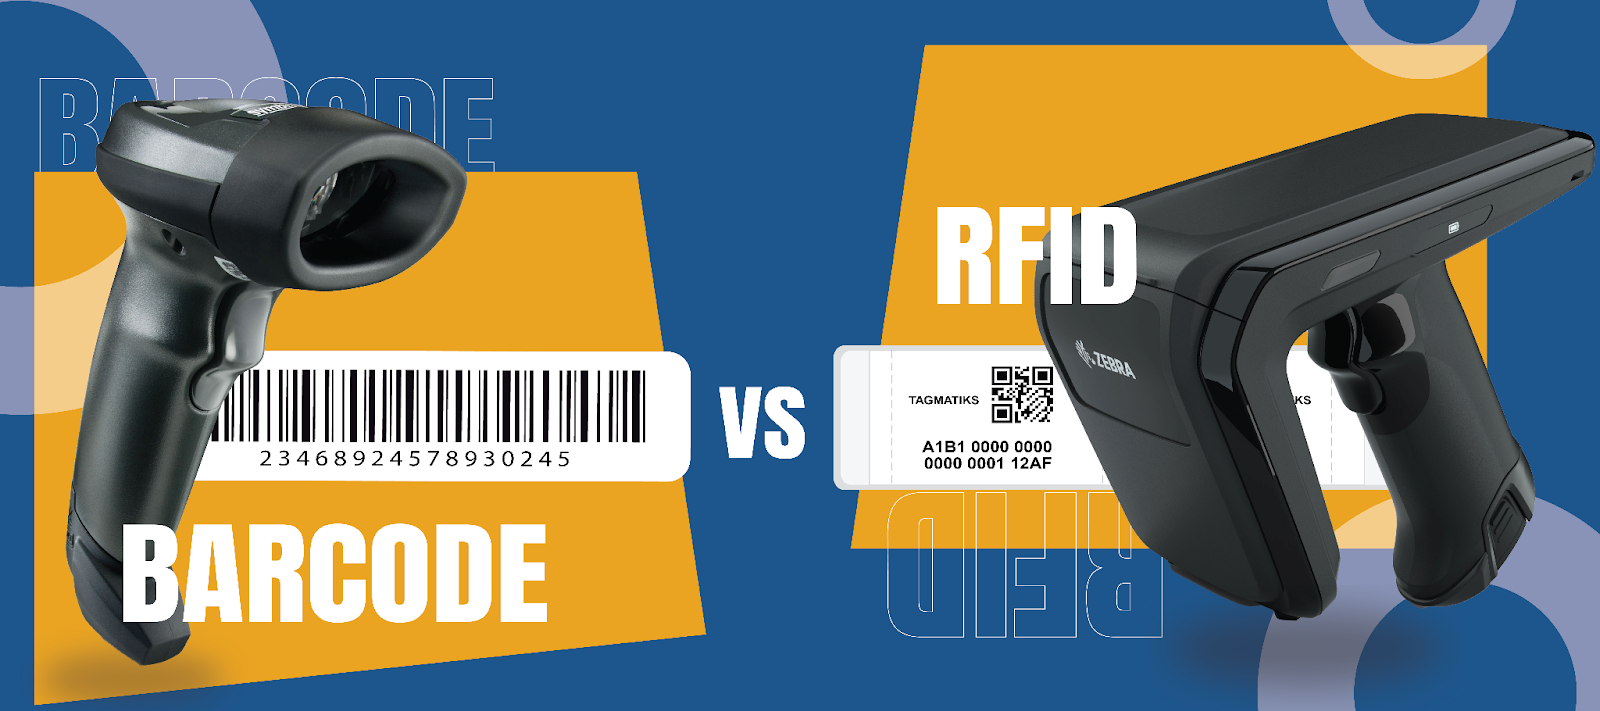 Difference Between barcode and RFID